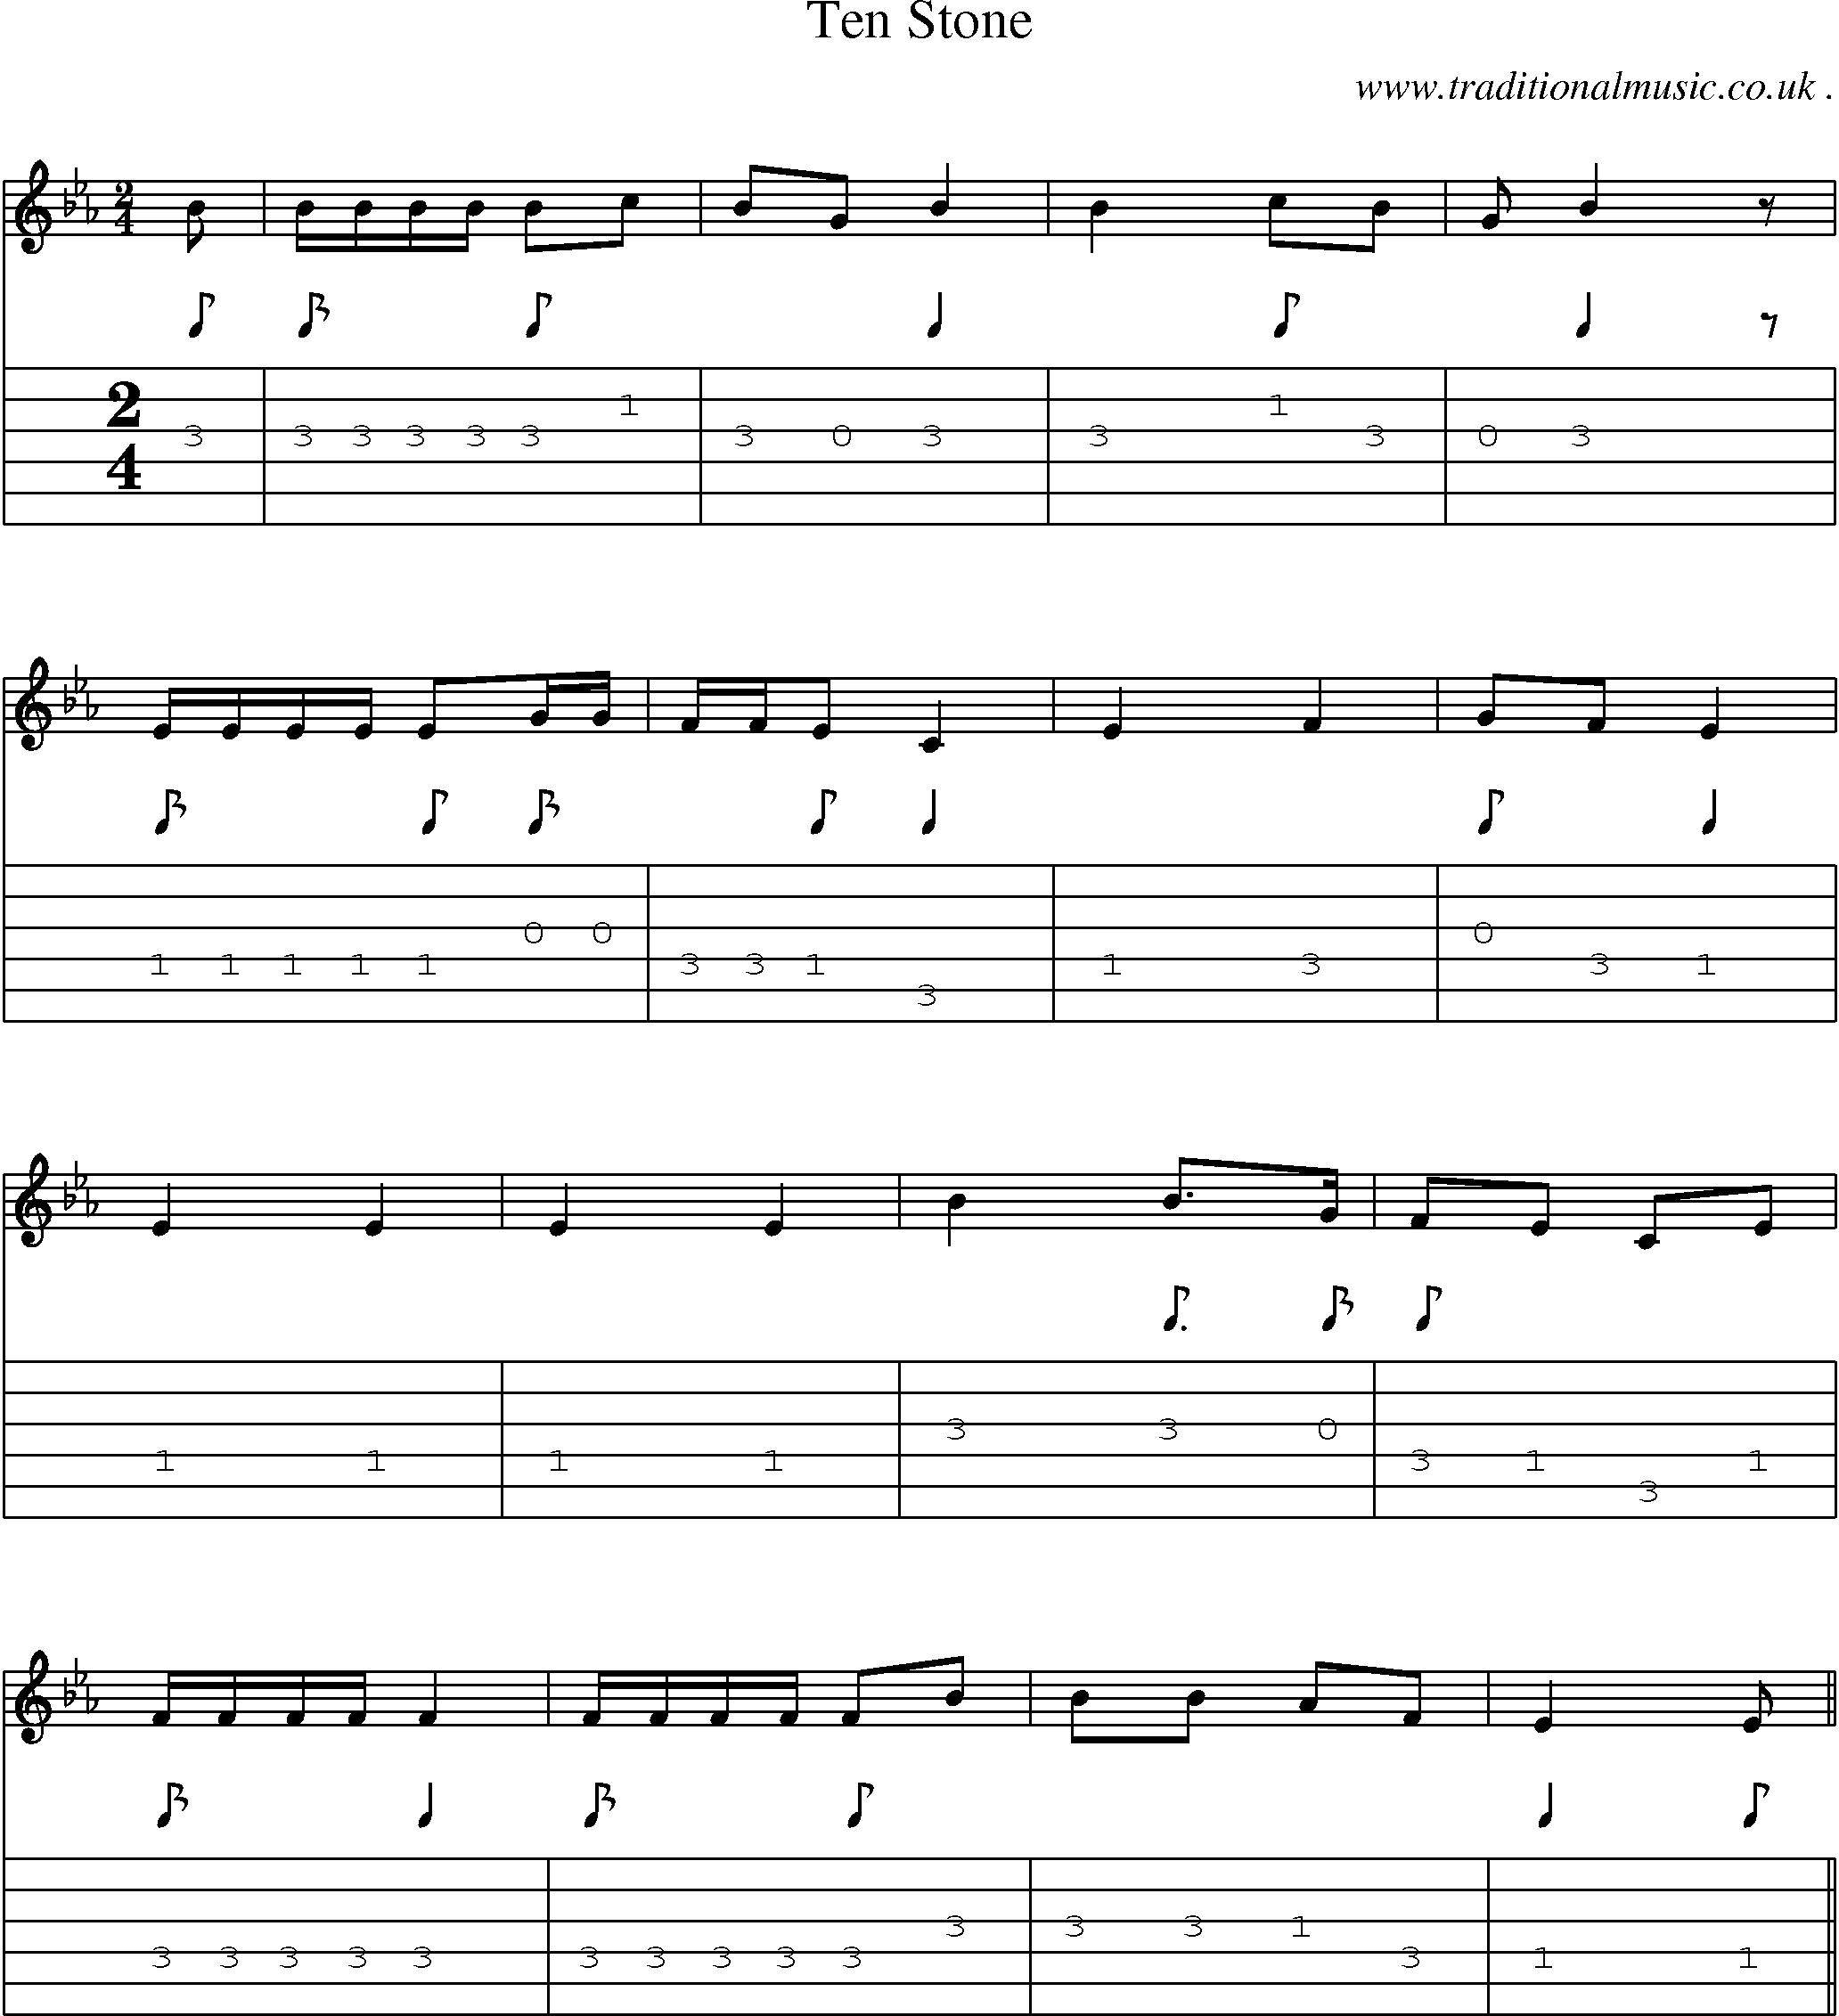 Sheet-Music and Guitar Tabs for Ten Stone